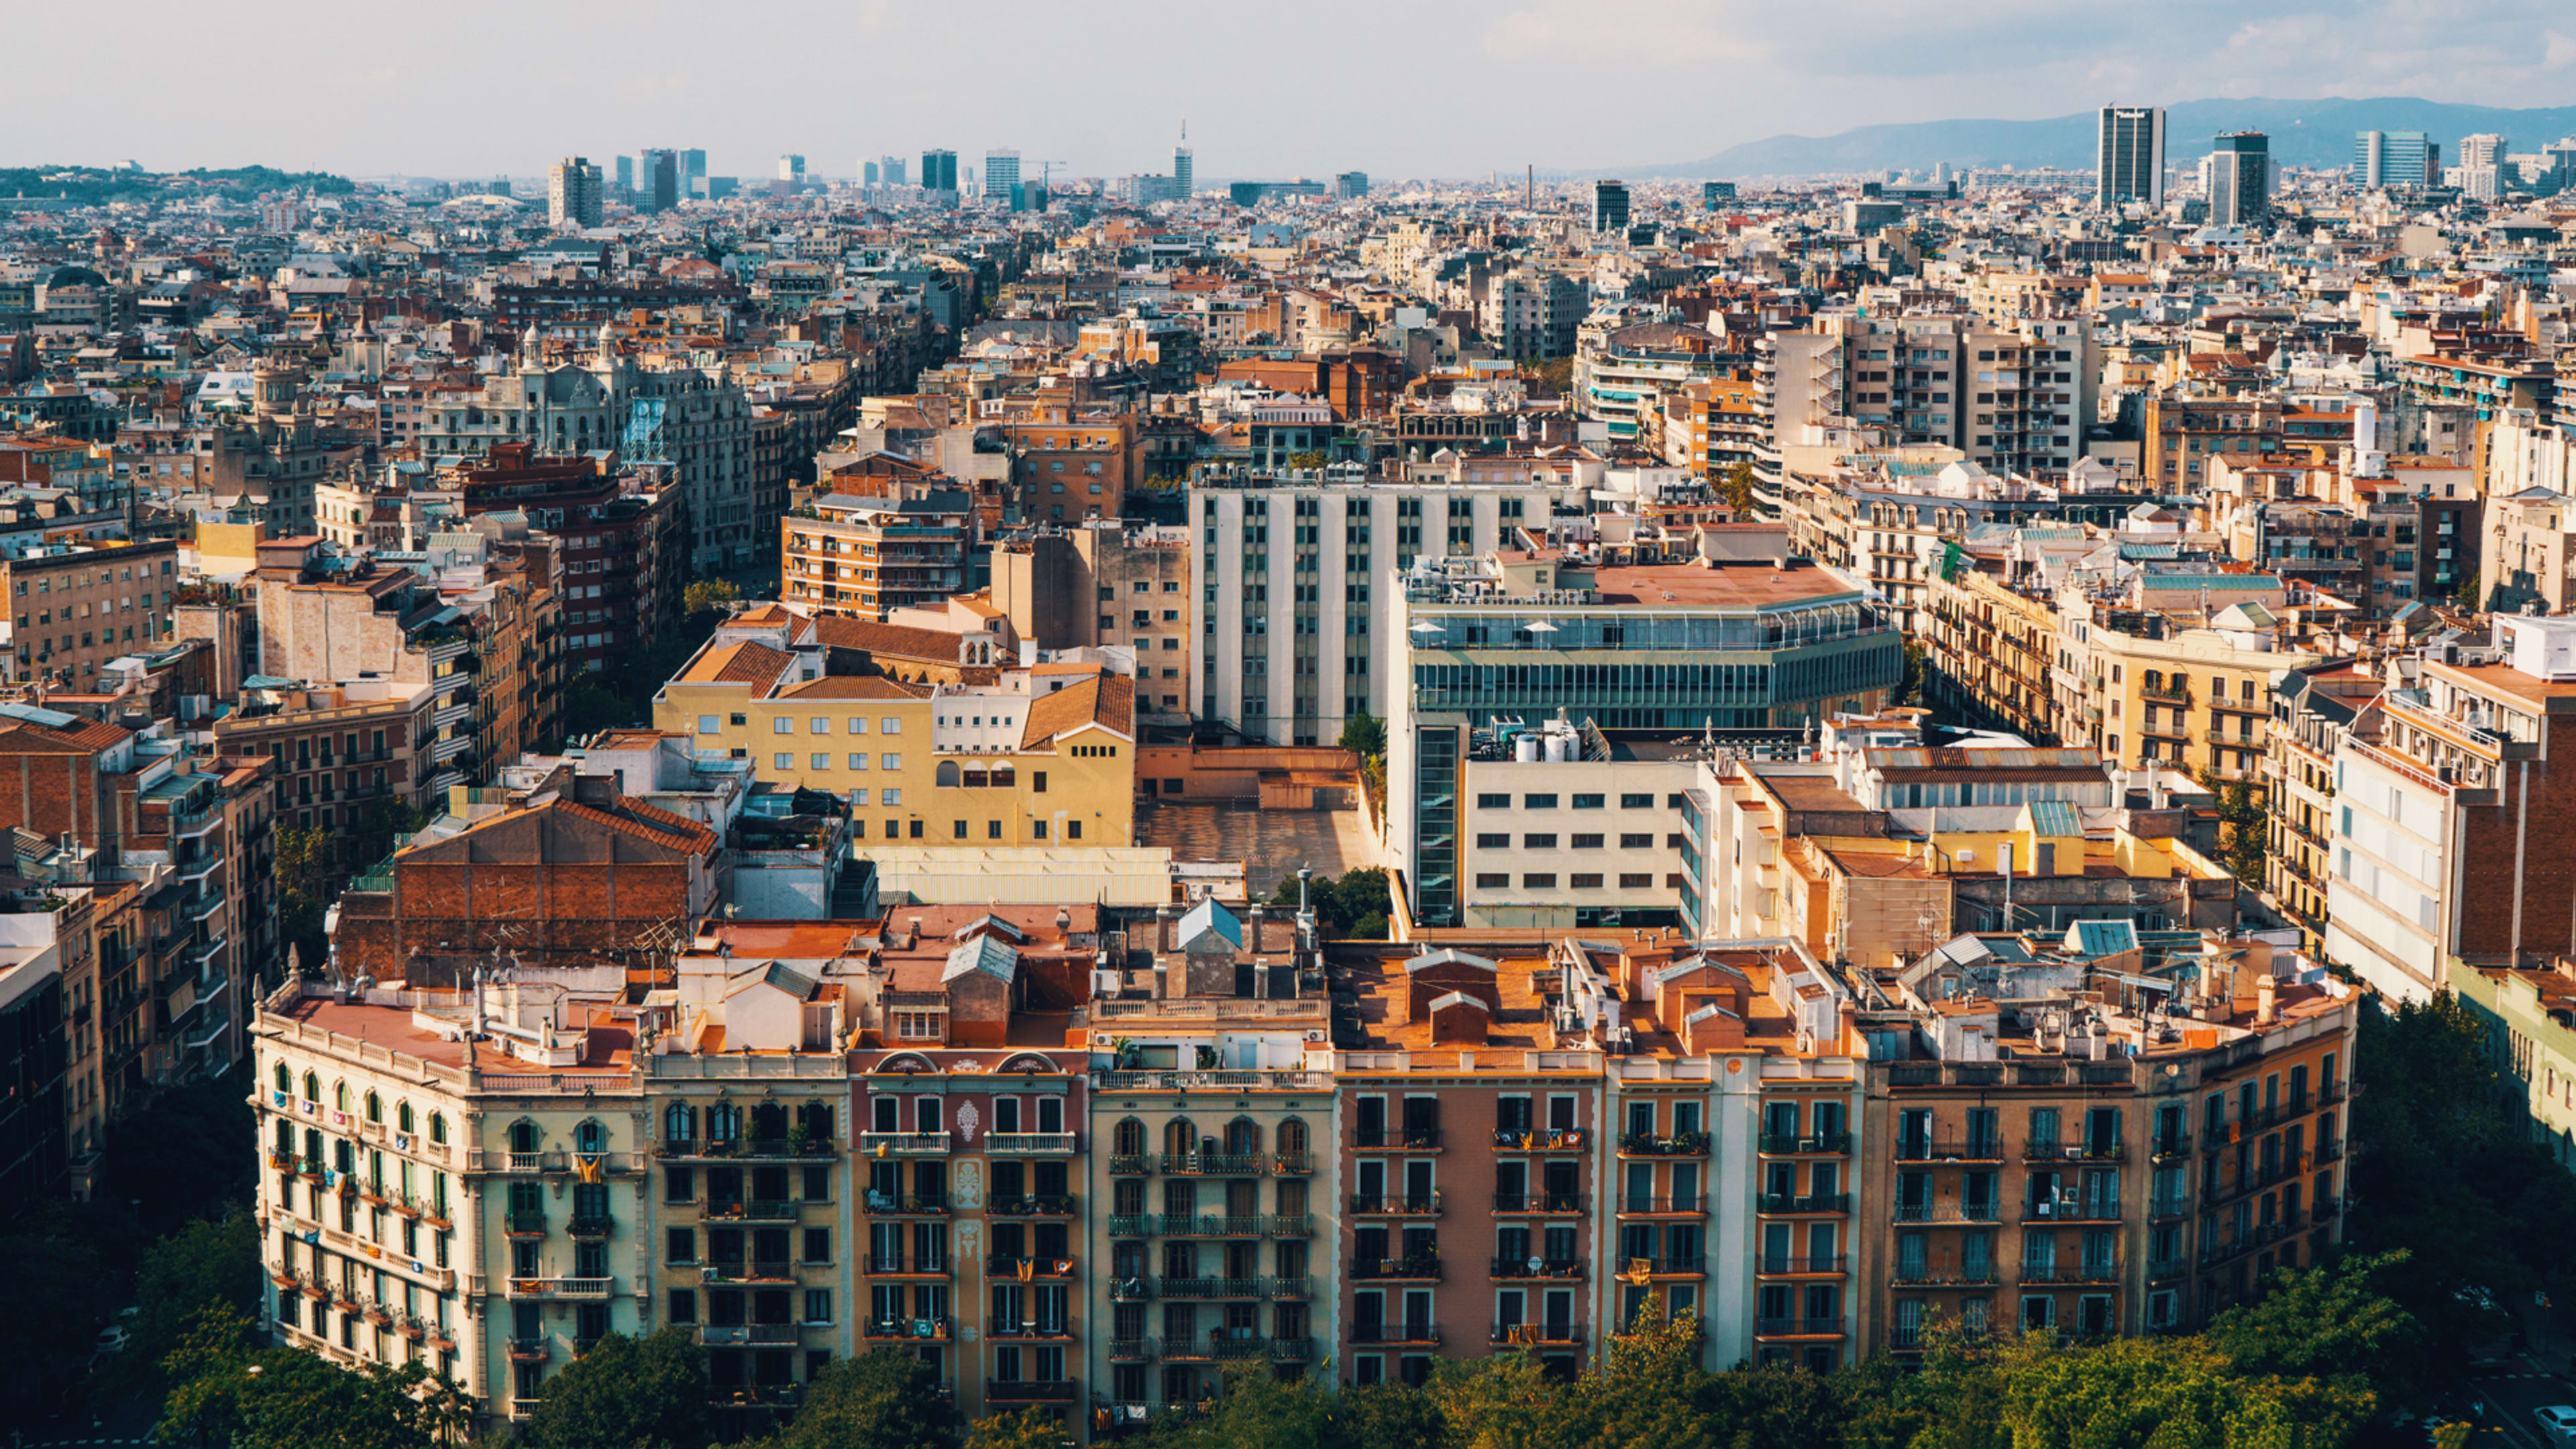 Barcelona’s ingenious ‘superblocks’ could prevent 700 premature deaths every year